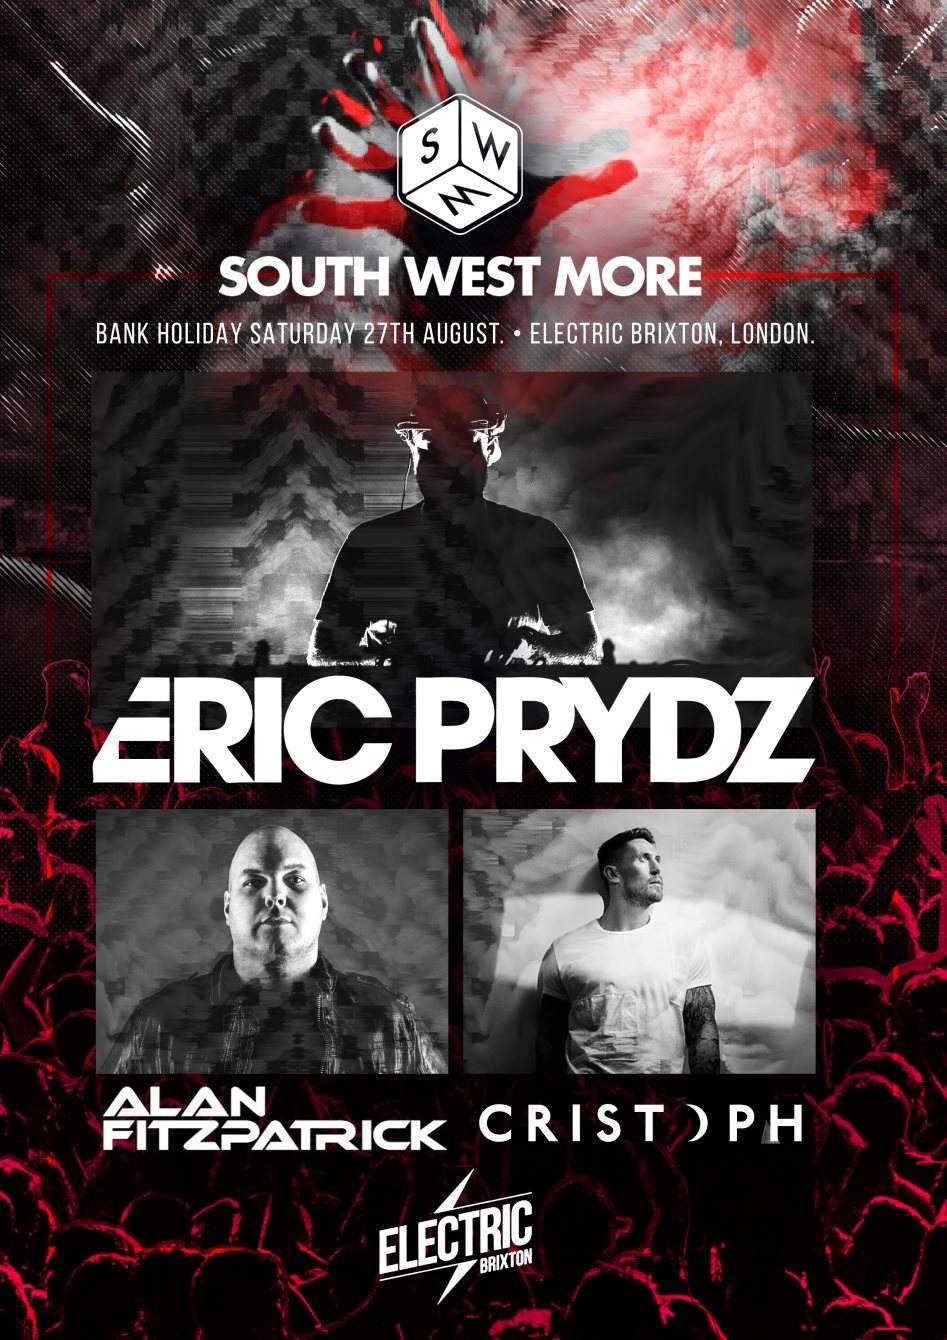 South West More Saturday with Eric Prydz & Alan Fitzpatrick - フライヤー裏